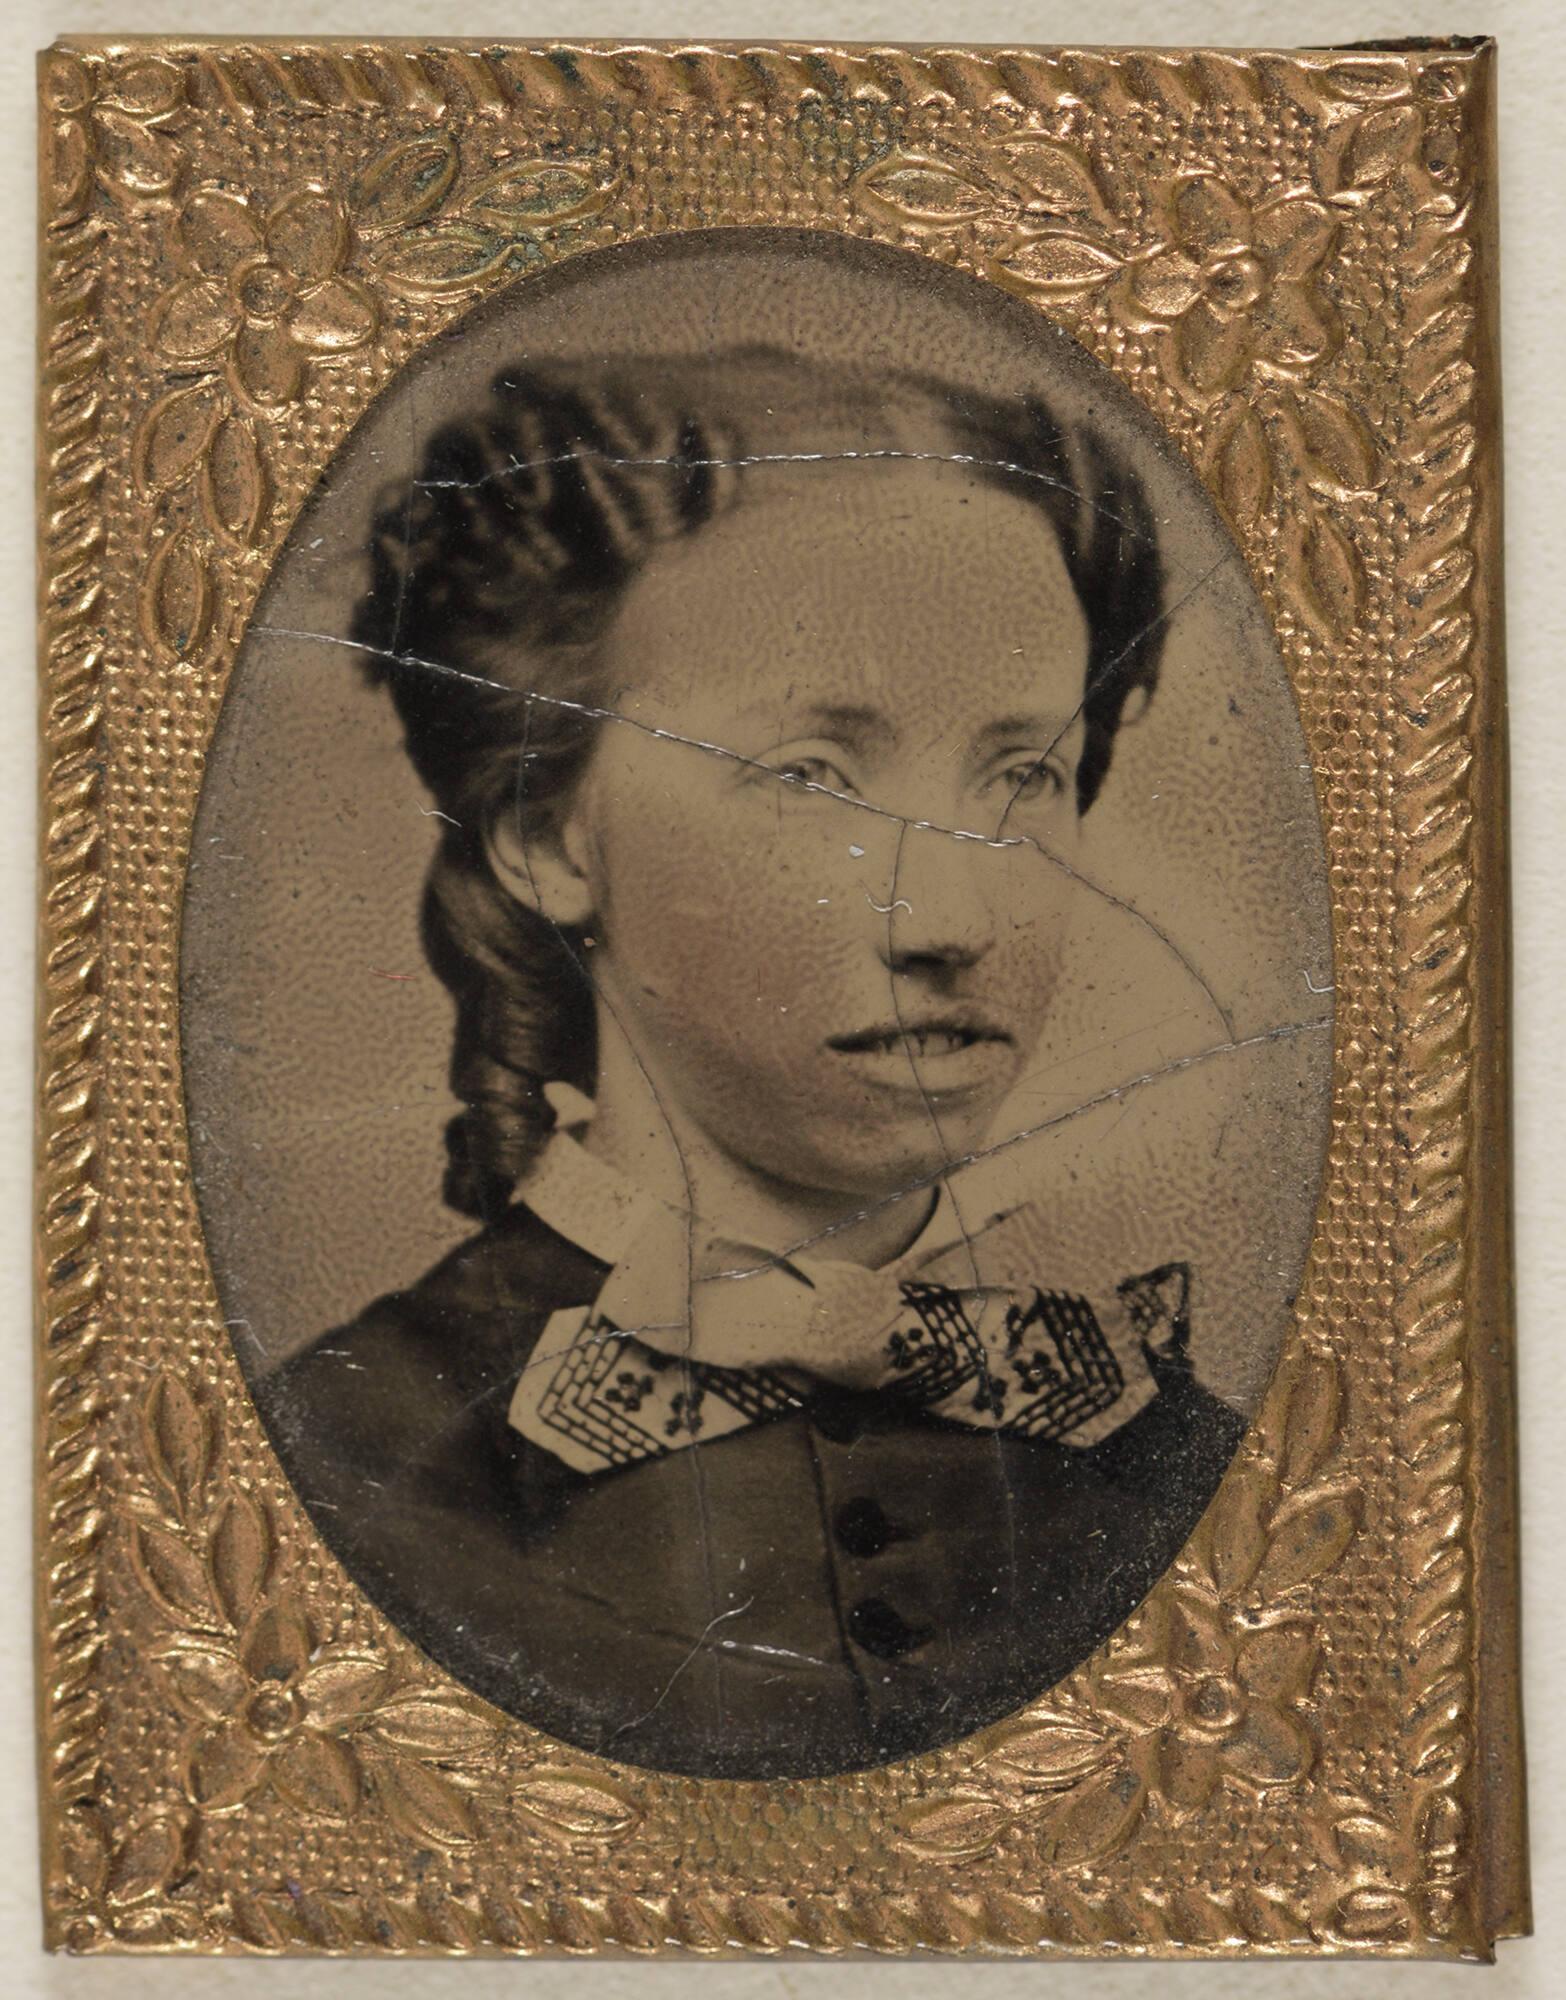 Black and white oval photograph of the head and shoulders of Isabella Stewart Gardner, a white woman with dark hair pulled back in 19th century dress.